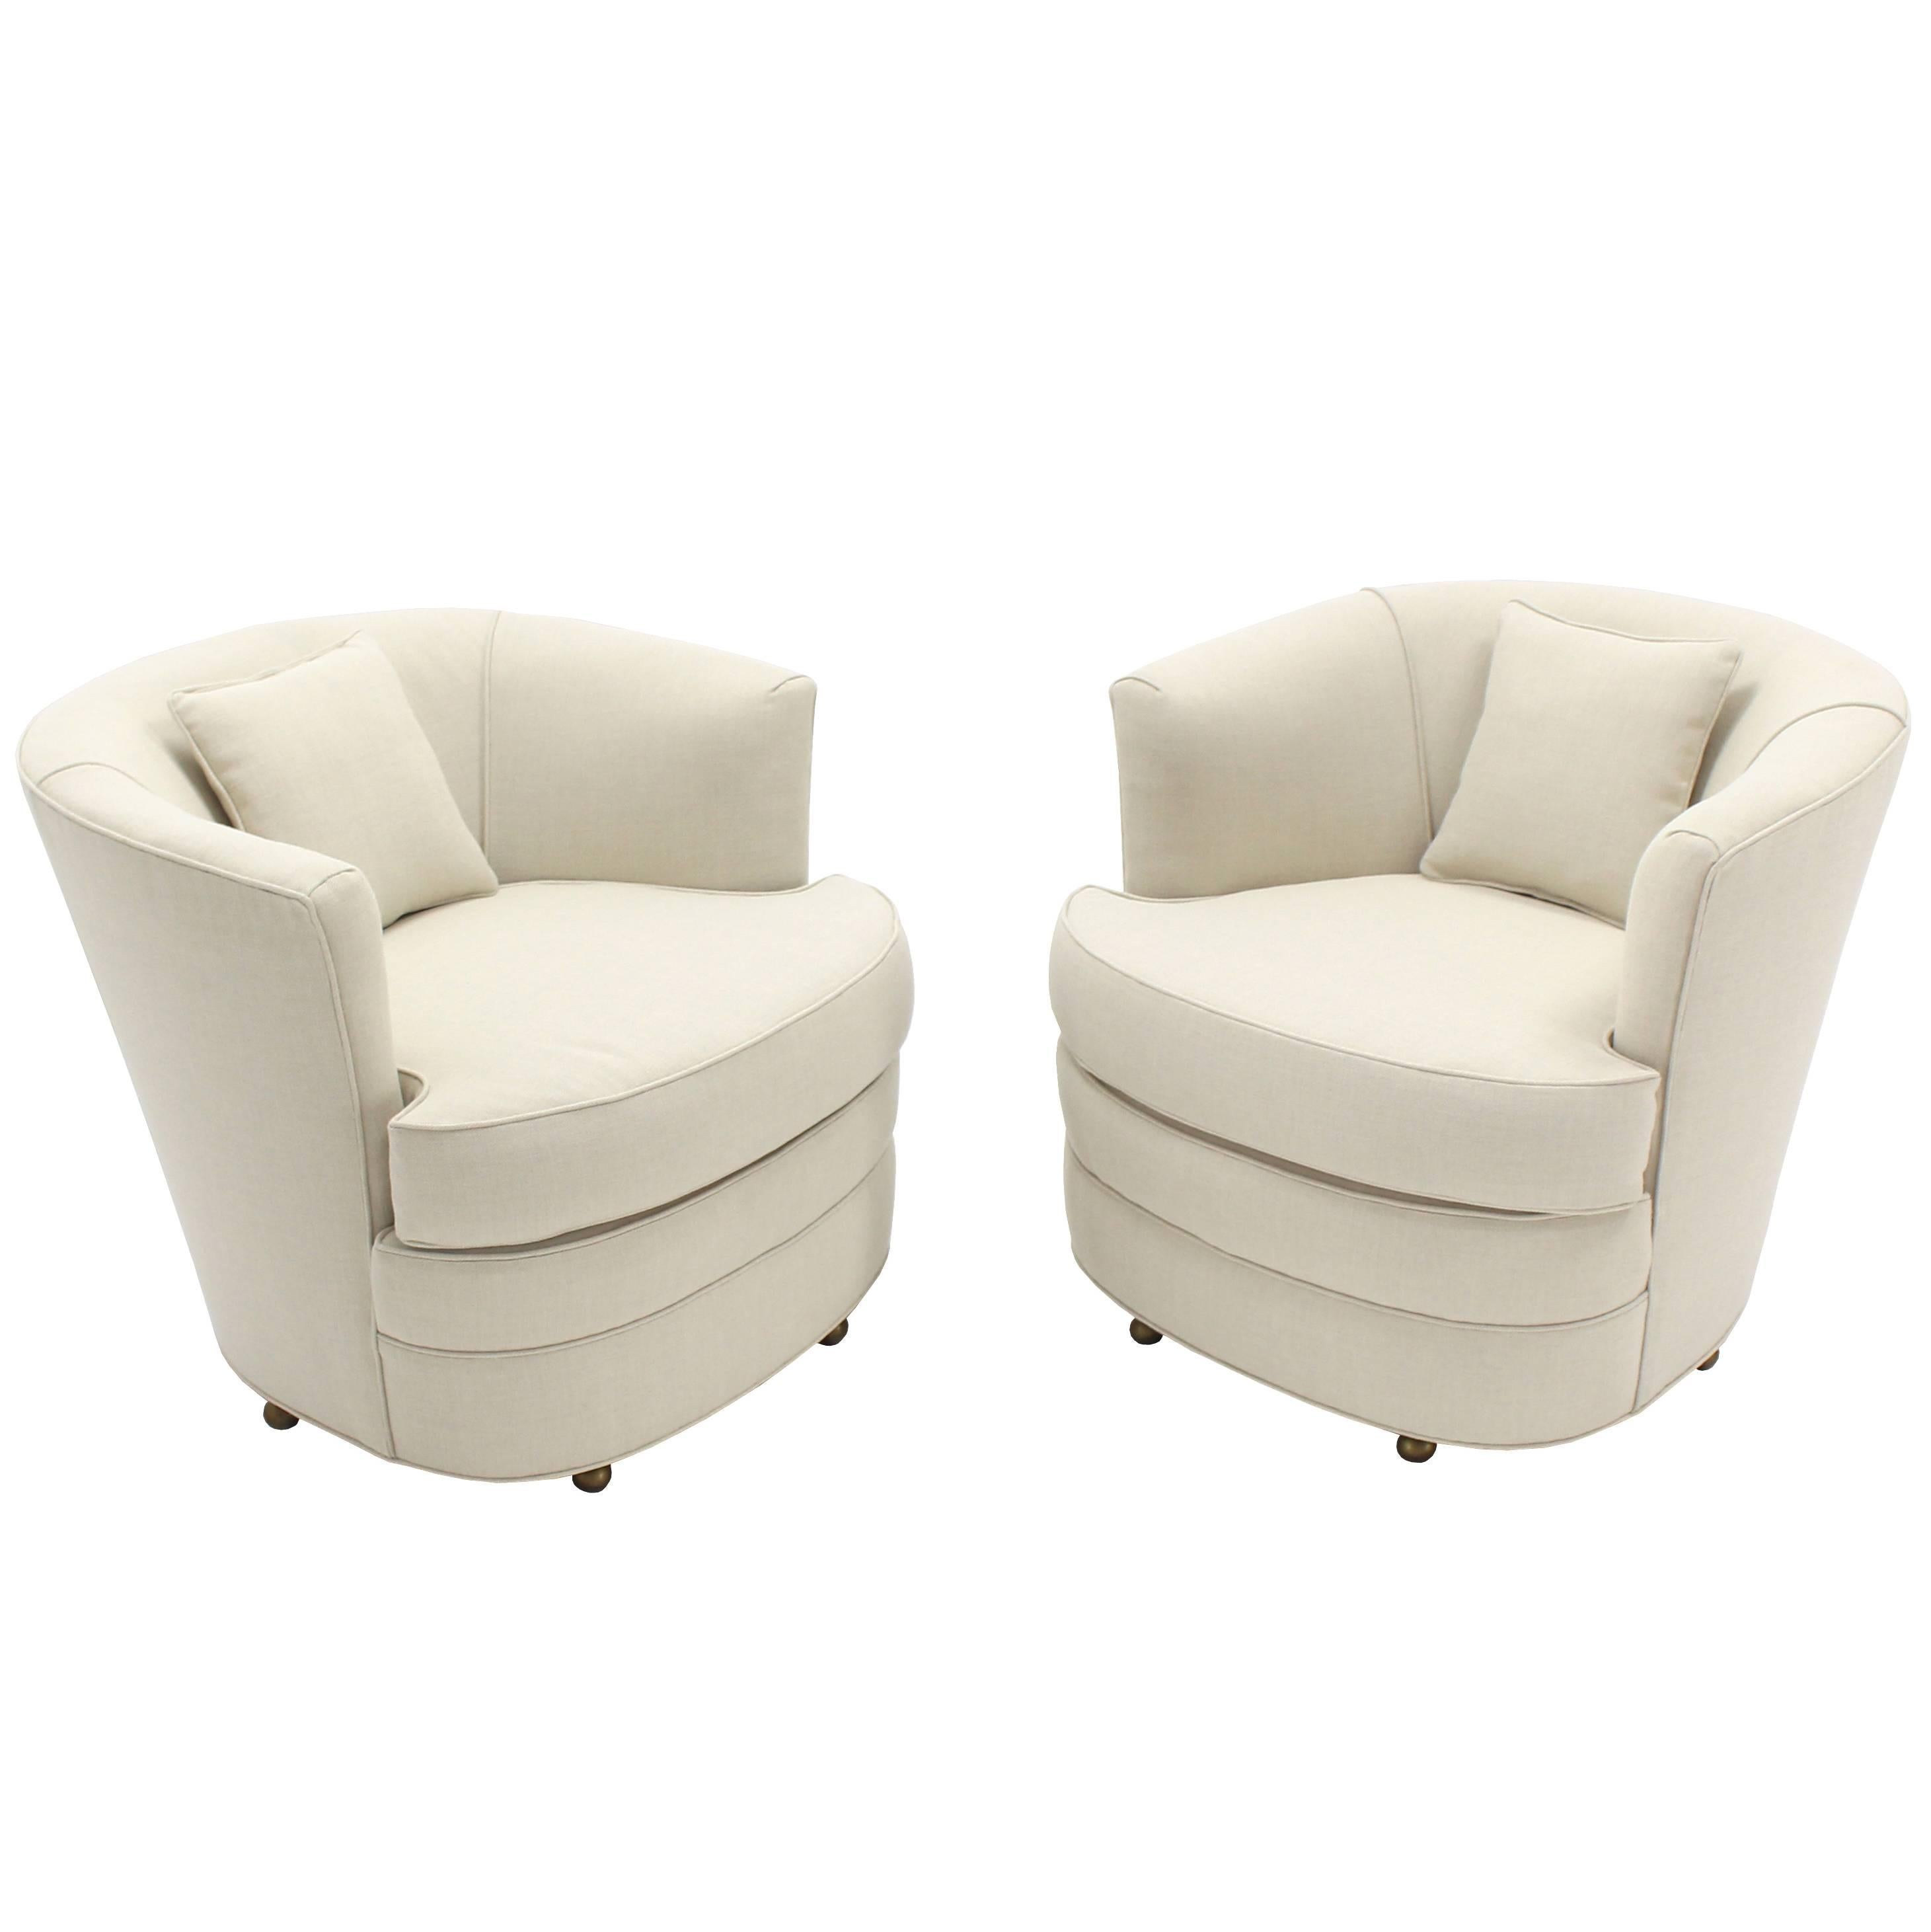 Pair of Swivel Barrel Back Chairs New Upholstery